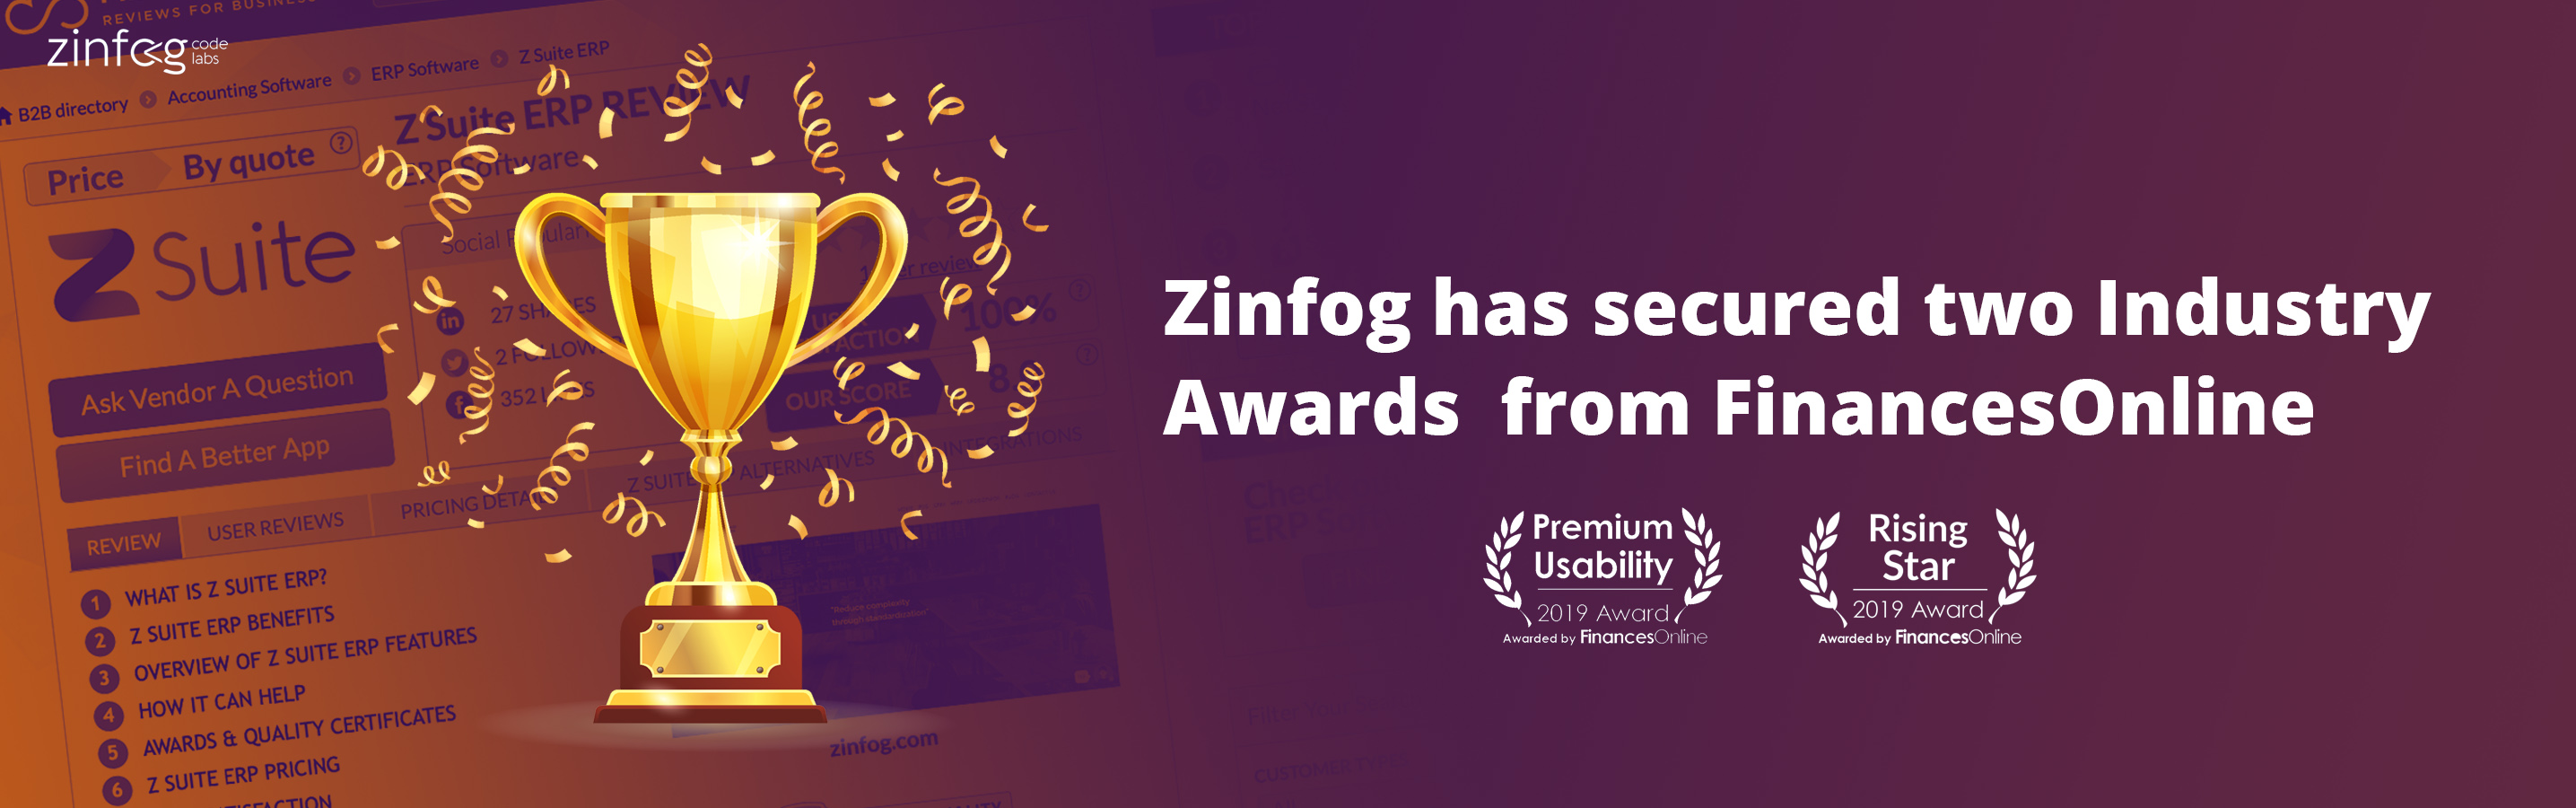 zinfog_has_secured_two_industry_awards_from_financeonline.html